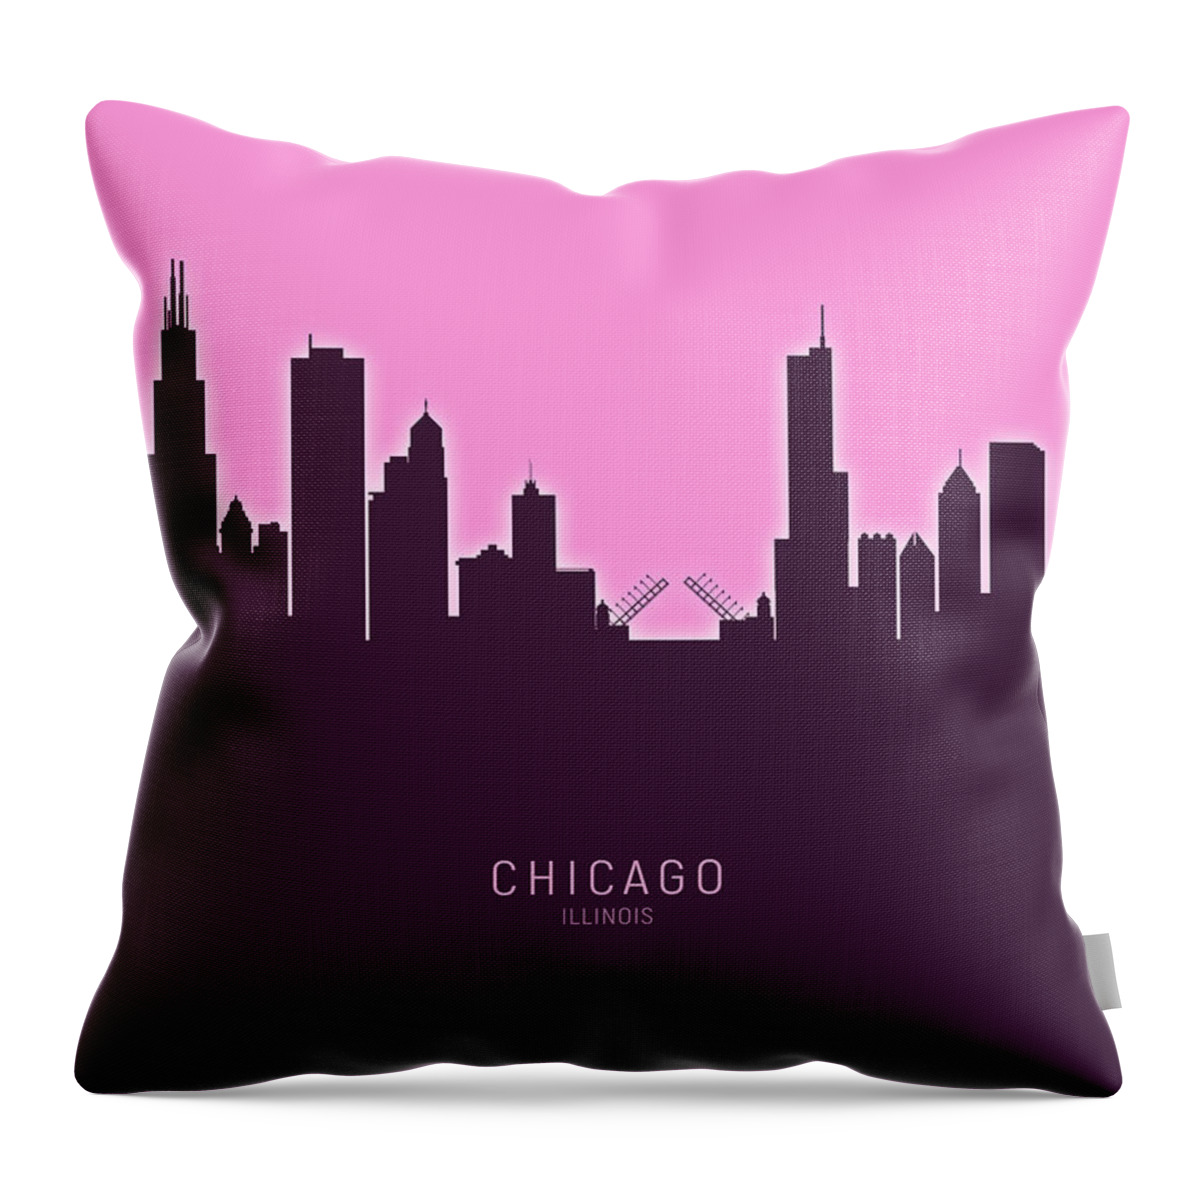 Chicago Throw Pillow featuring the digital art Chicago Illinois Skyline #59 by Michael Tompsett